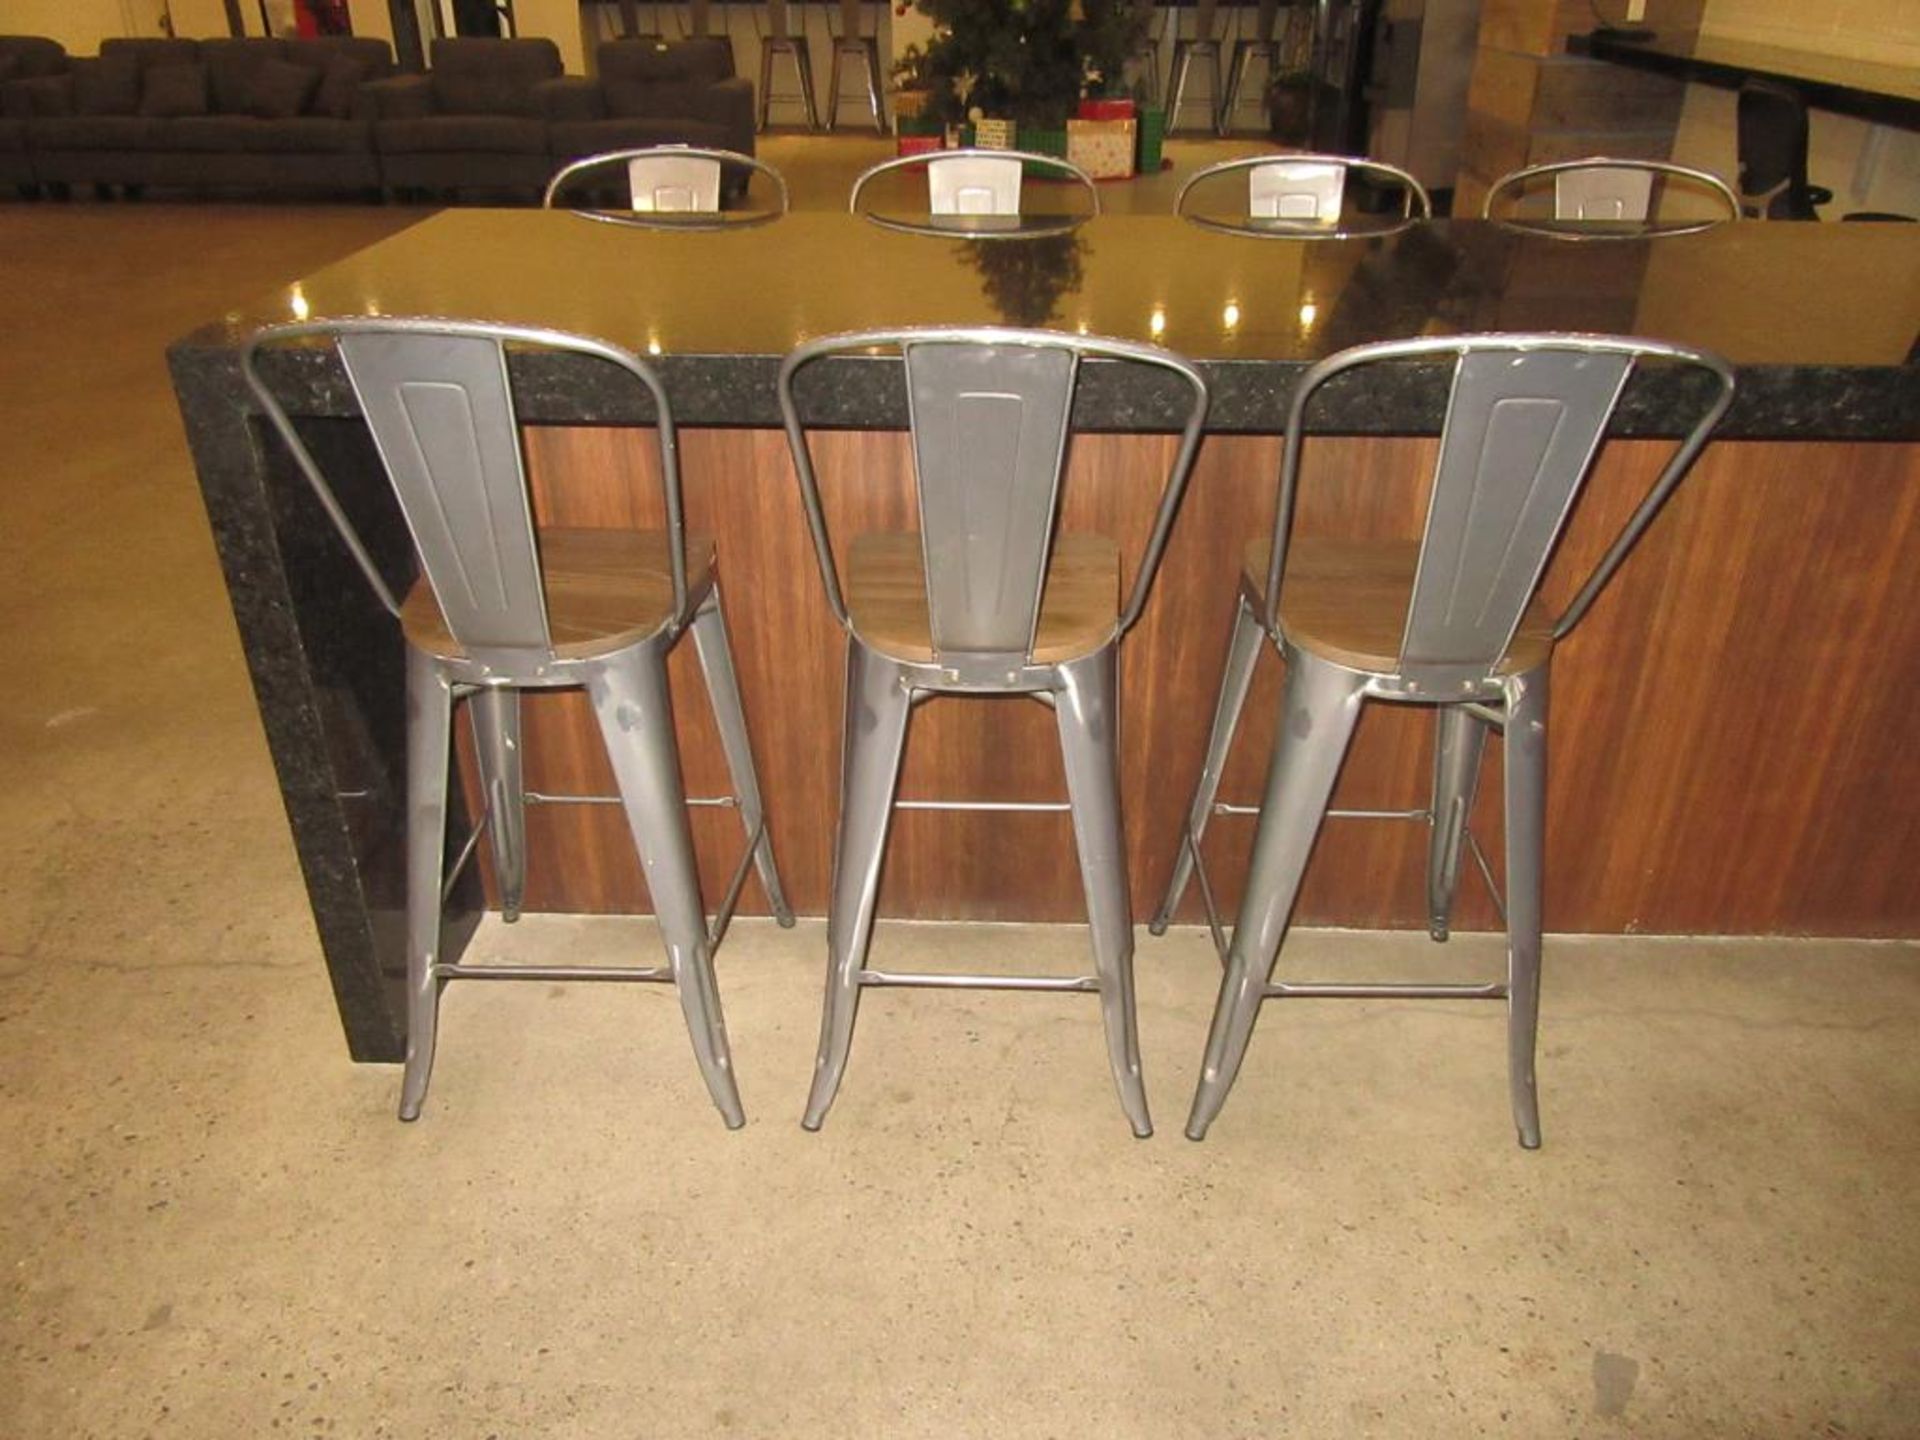 Barstool Chairs - Image 3 of 3